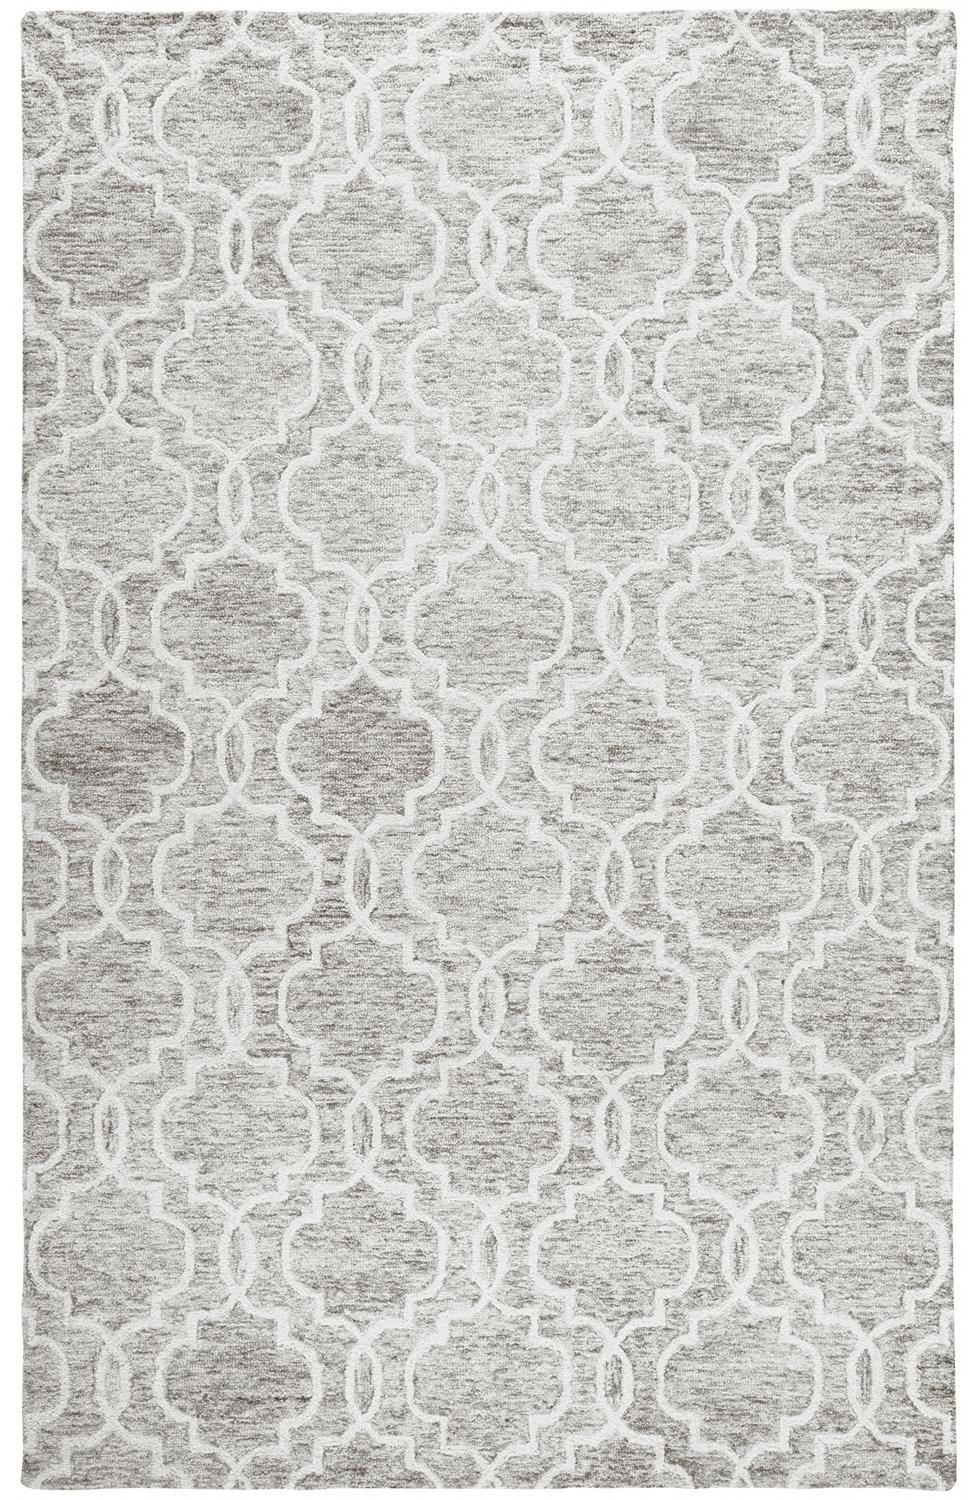 2' X 3' Gray And Ivory Wool Geometric Tufted Handmade Stain Resistant Area Rug-512191-1